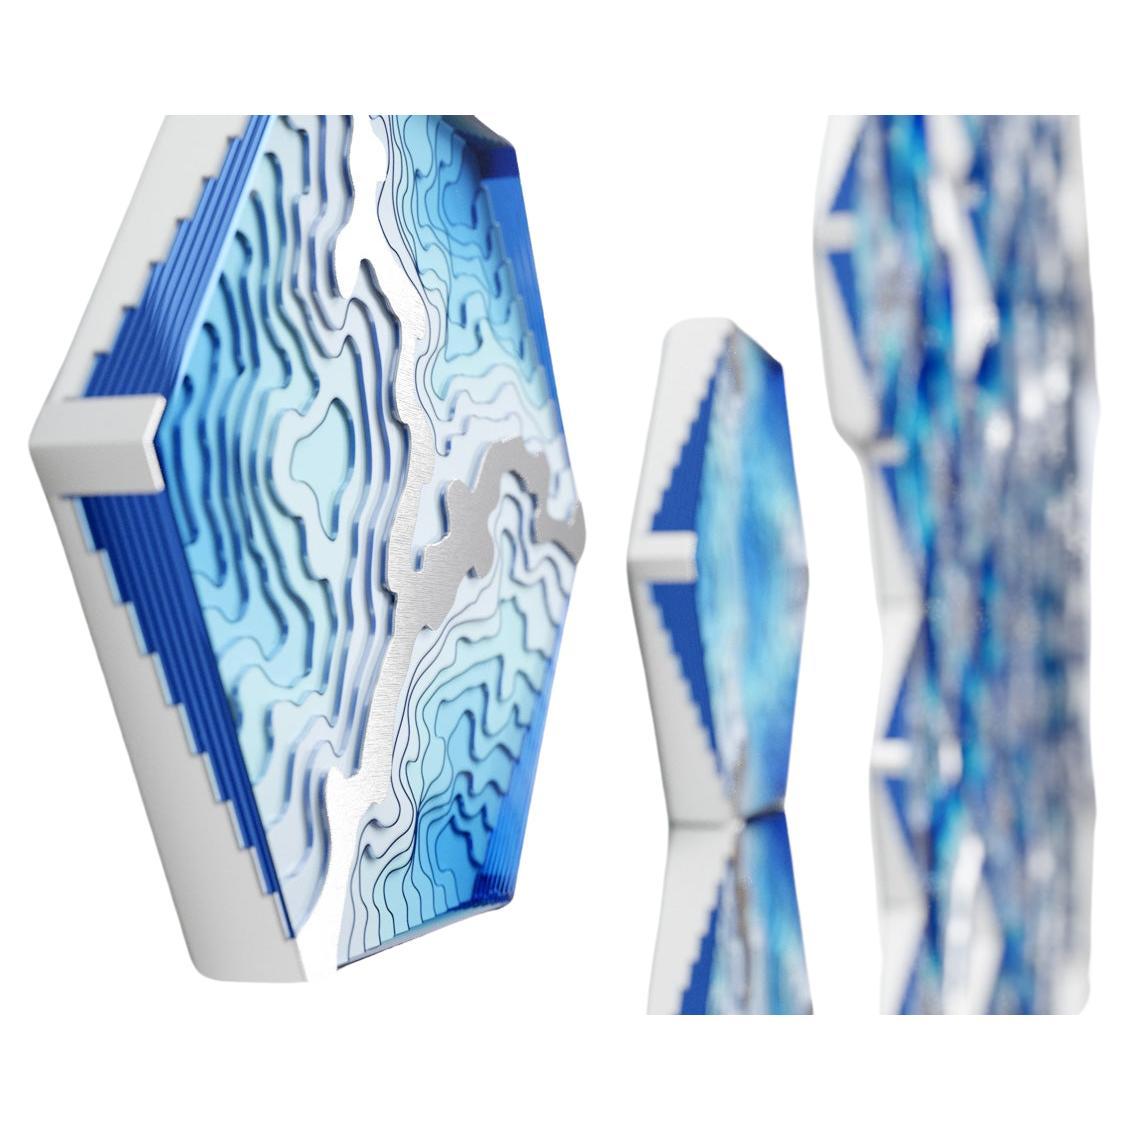 21st Century Interconnected Sculptural Wall Tiles  For Sale